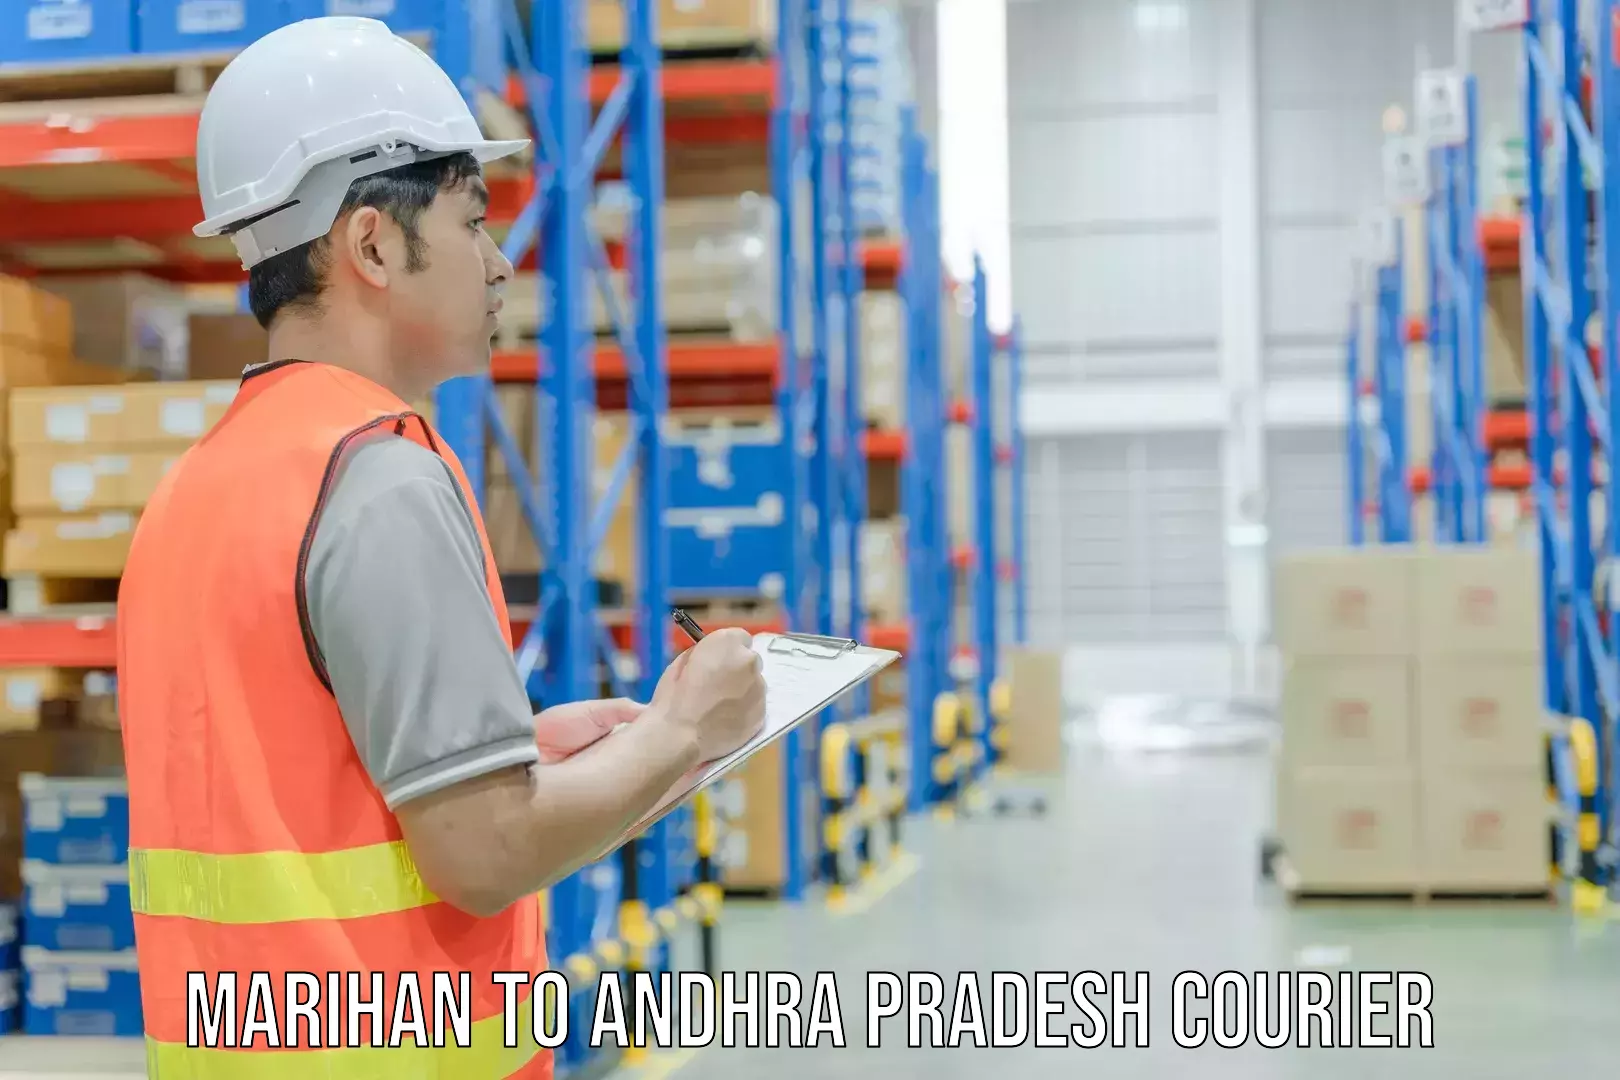 Express package delivery Marihan to Tripuranthakam